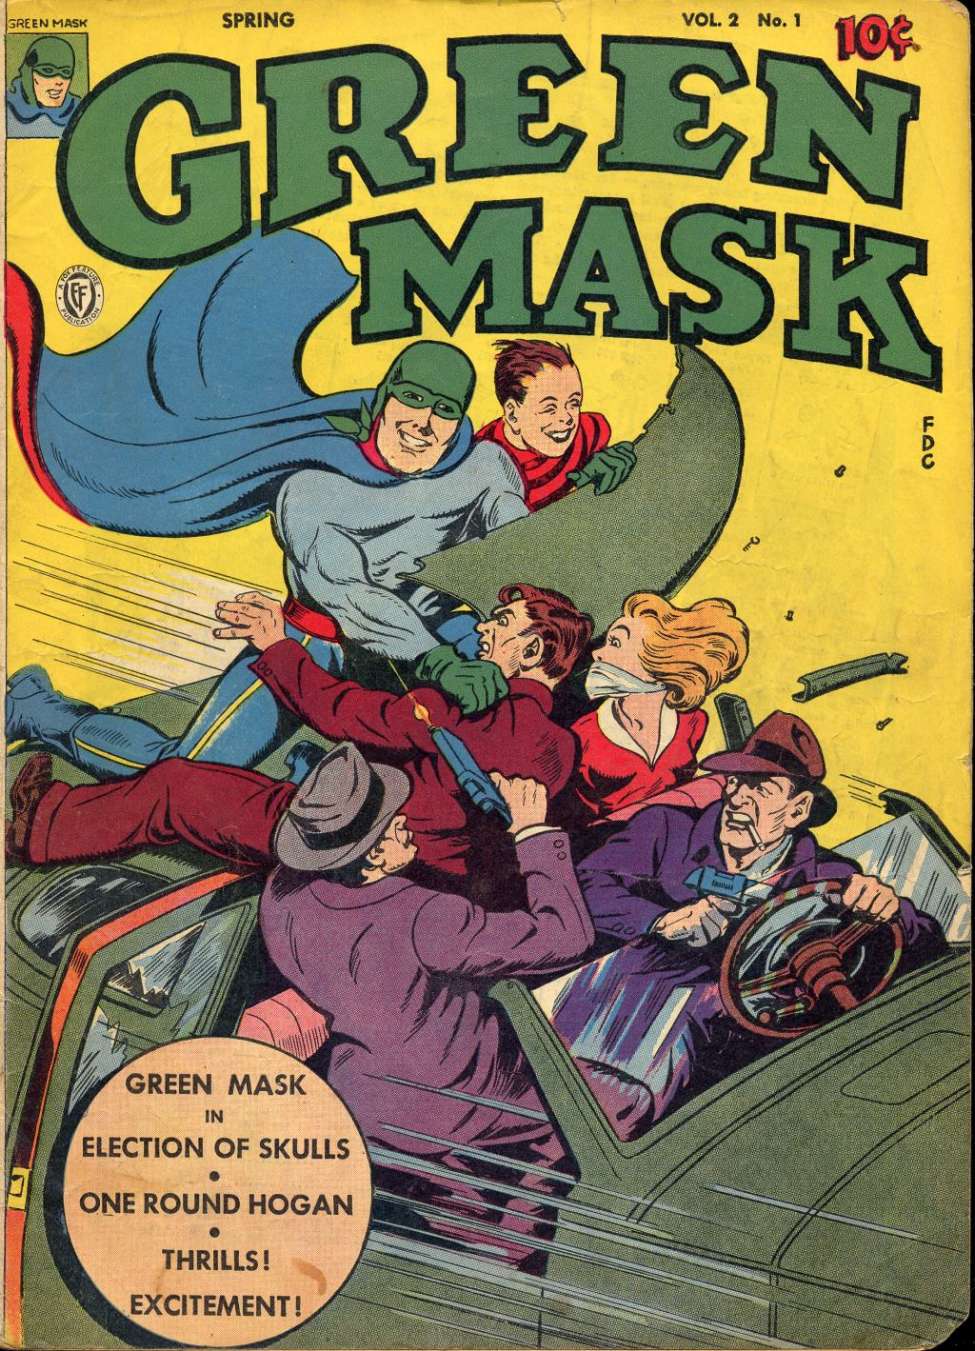 Comic Book Cover For The Green Mask v2 1 - Version 1